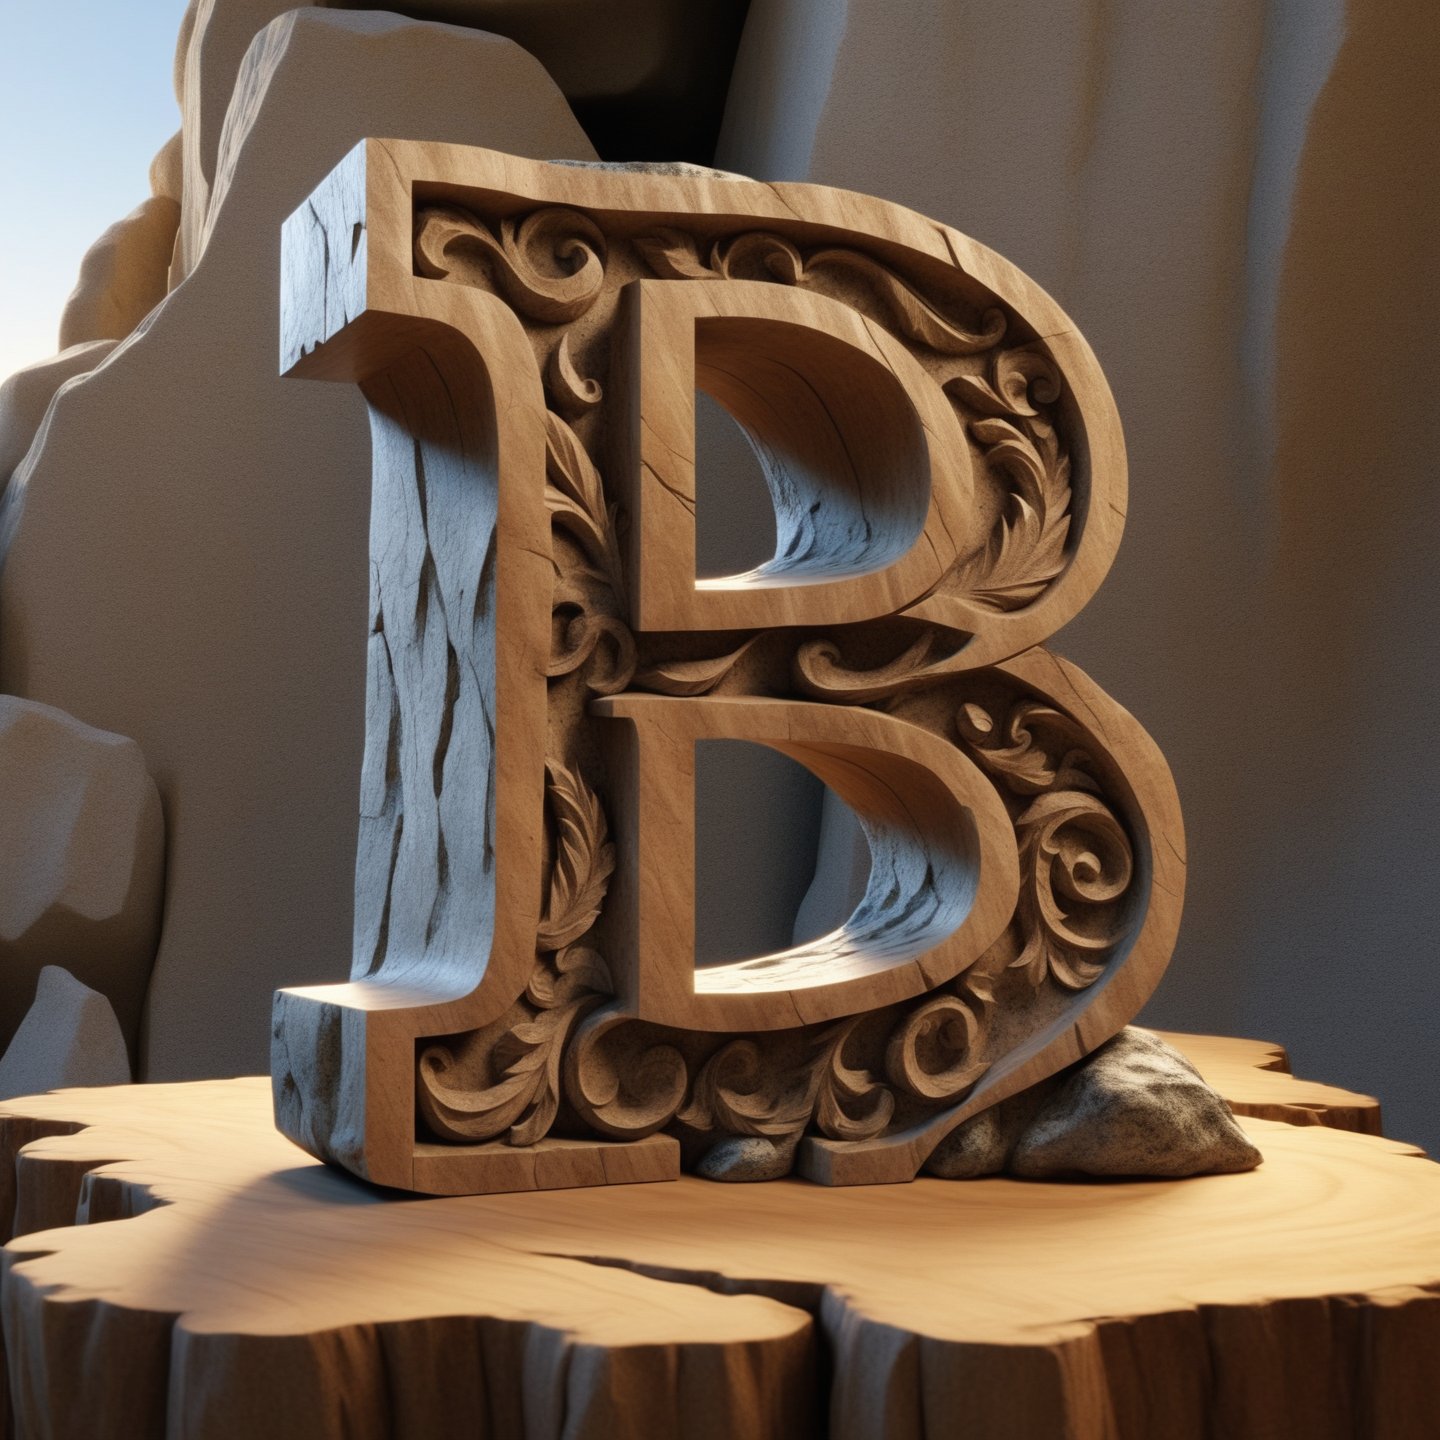 single rustic and robust capital letter B carved into the rock ornament  in vertical position over single clear wood table, all bords  soft curved, no acute corners